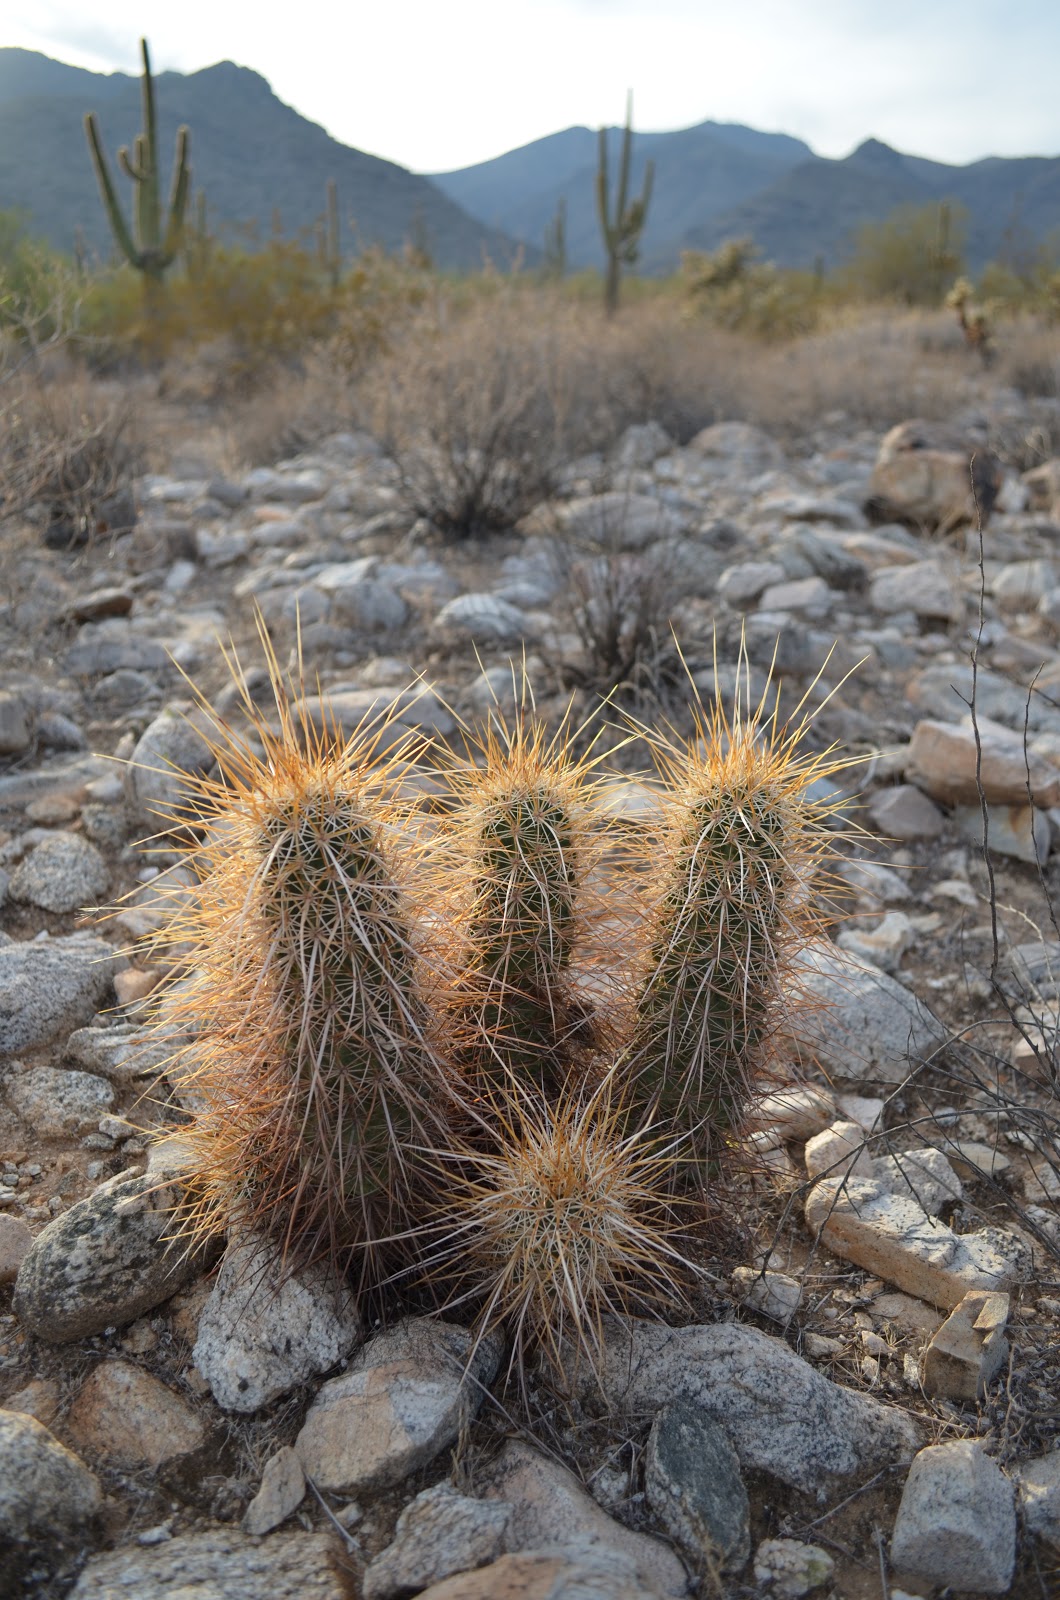 Practical Biology: science for everyone: Life of a Cactus Part 2: Roots